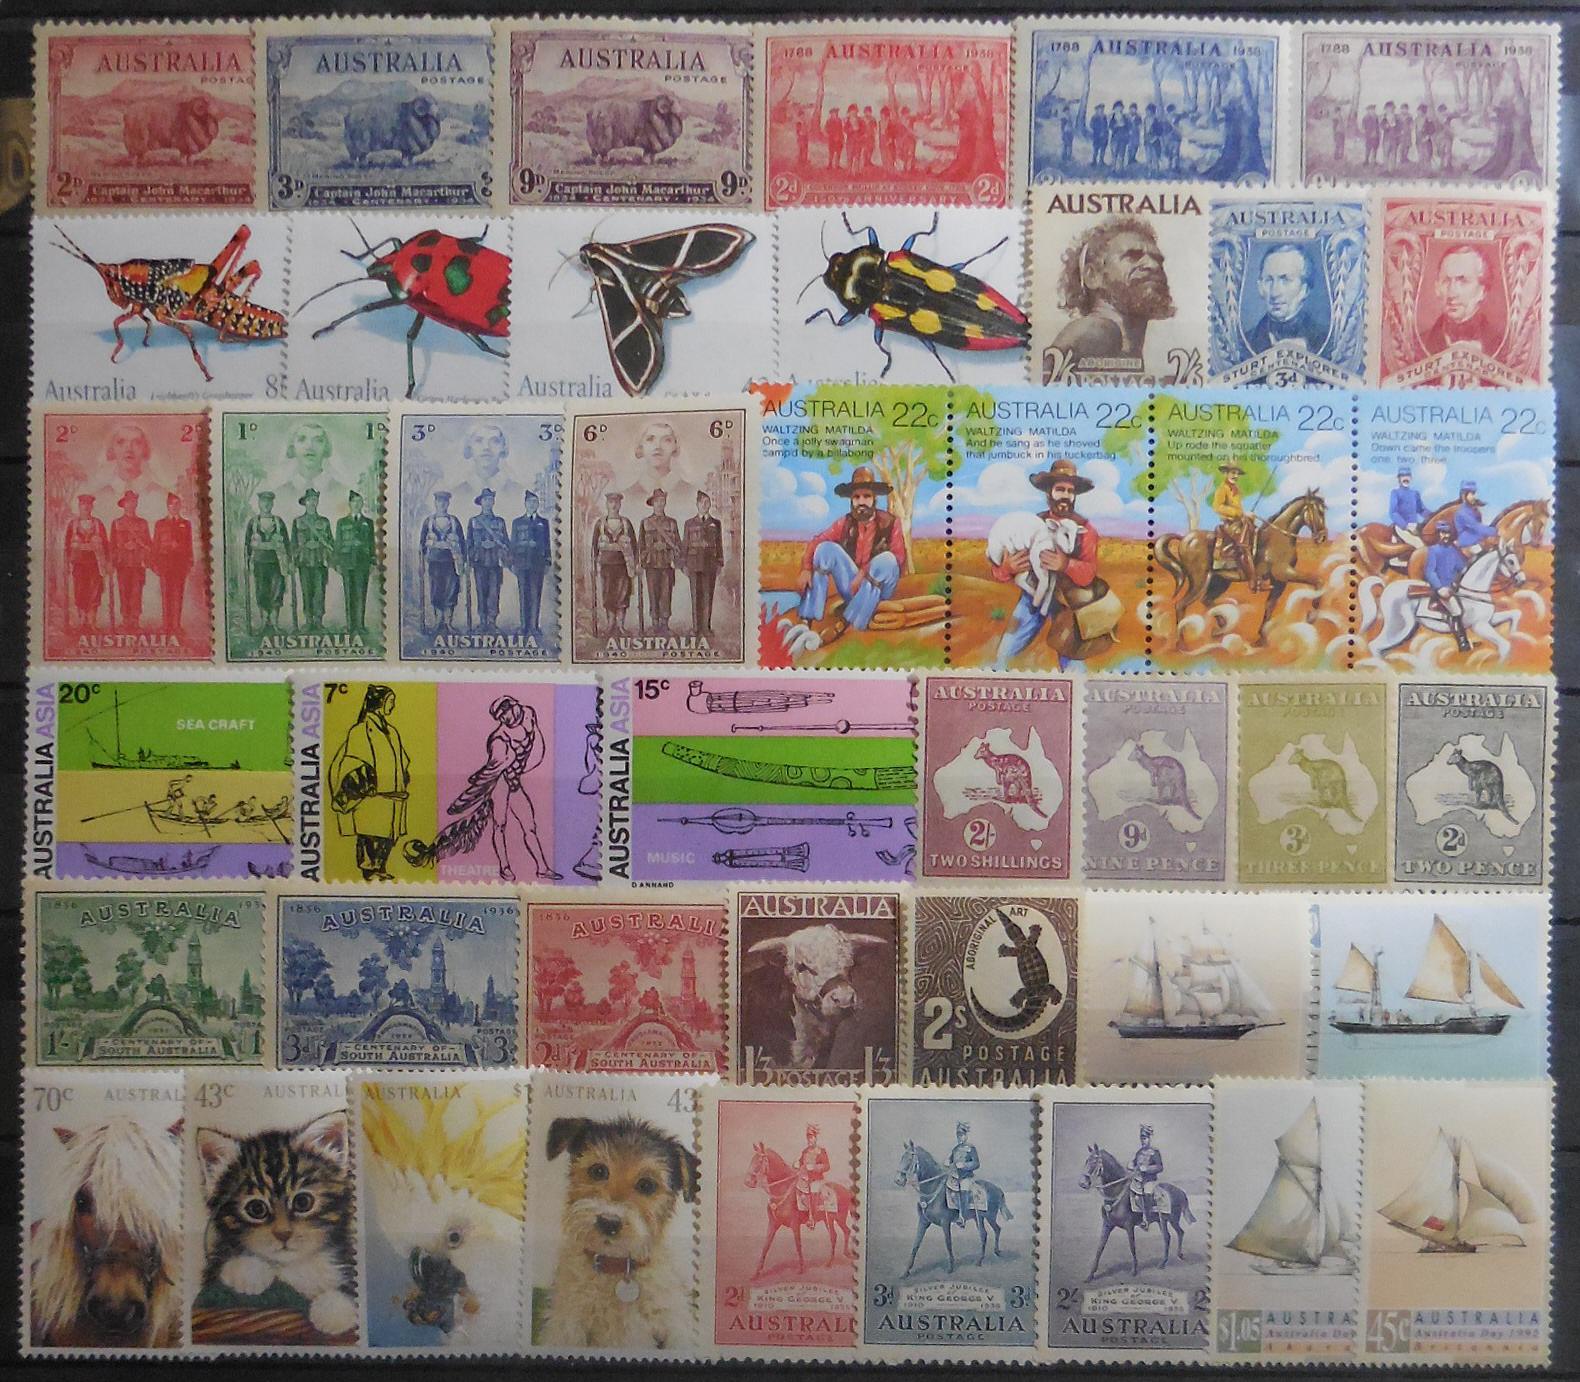 Australian stamps for collectors on approval